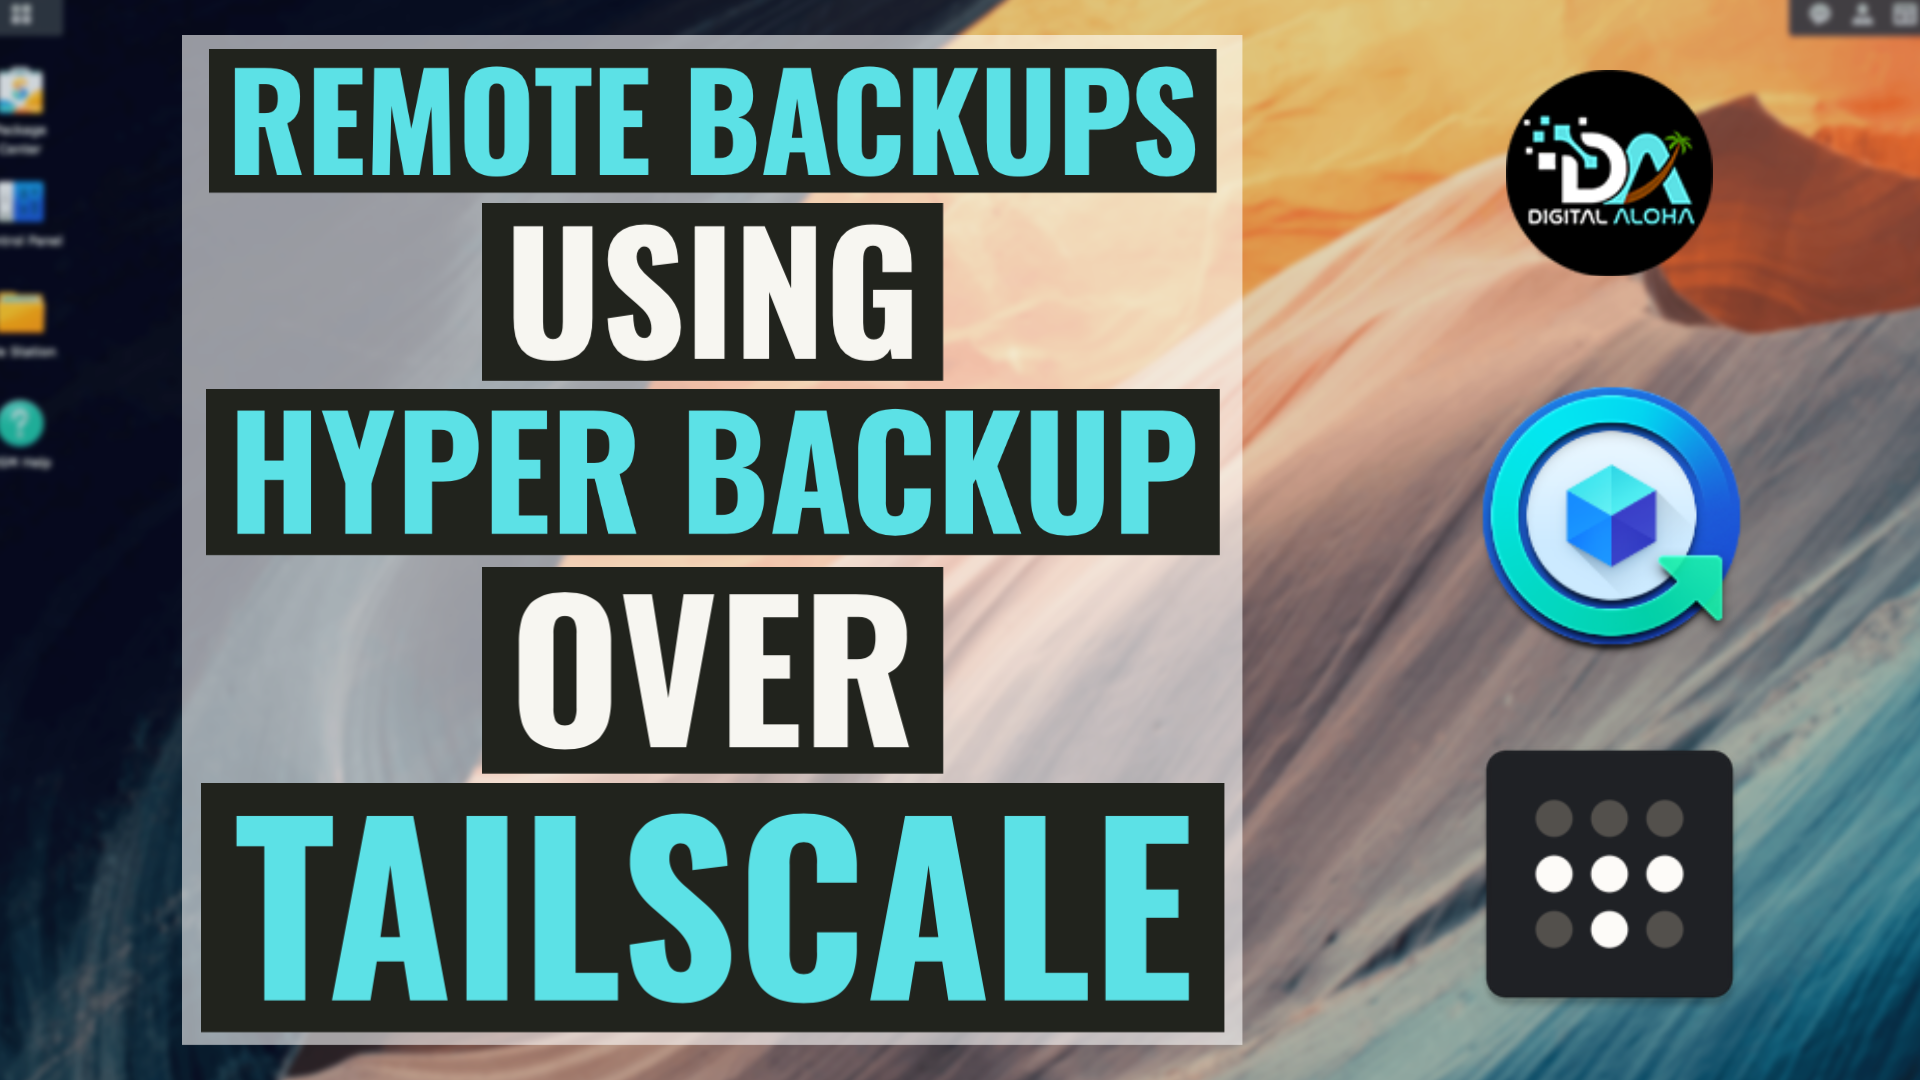 Backup Your Data To A Remote Synology NAS Using Hyper Backup And Tailscale